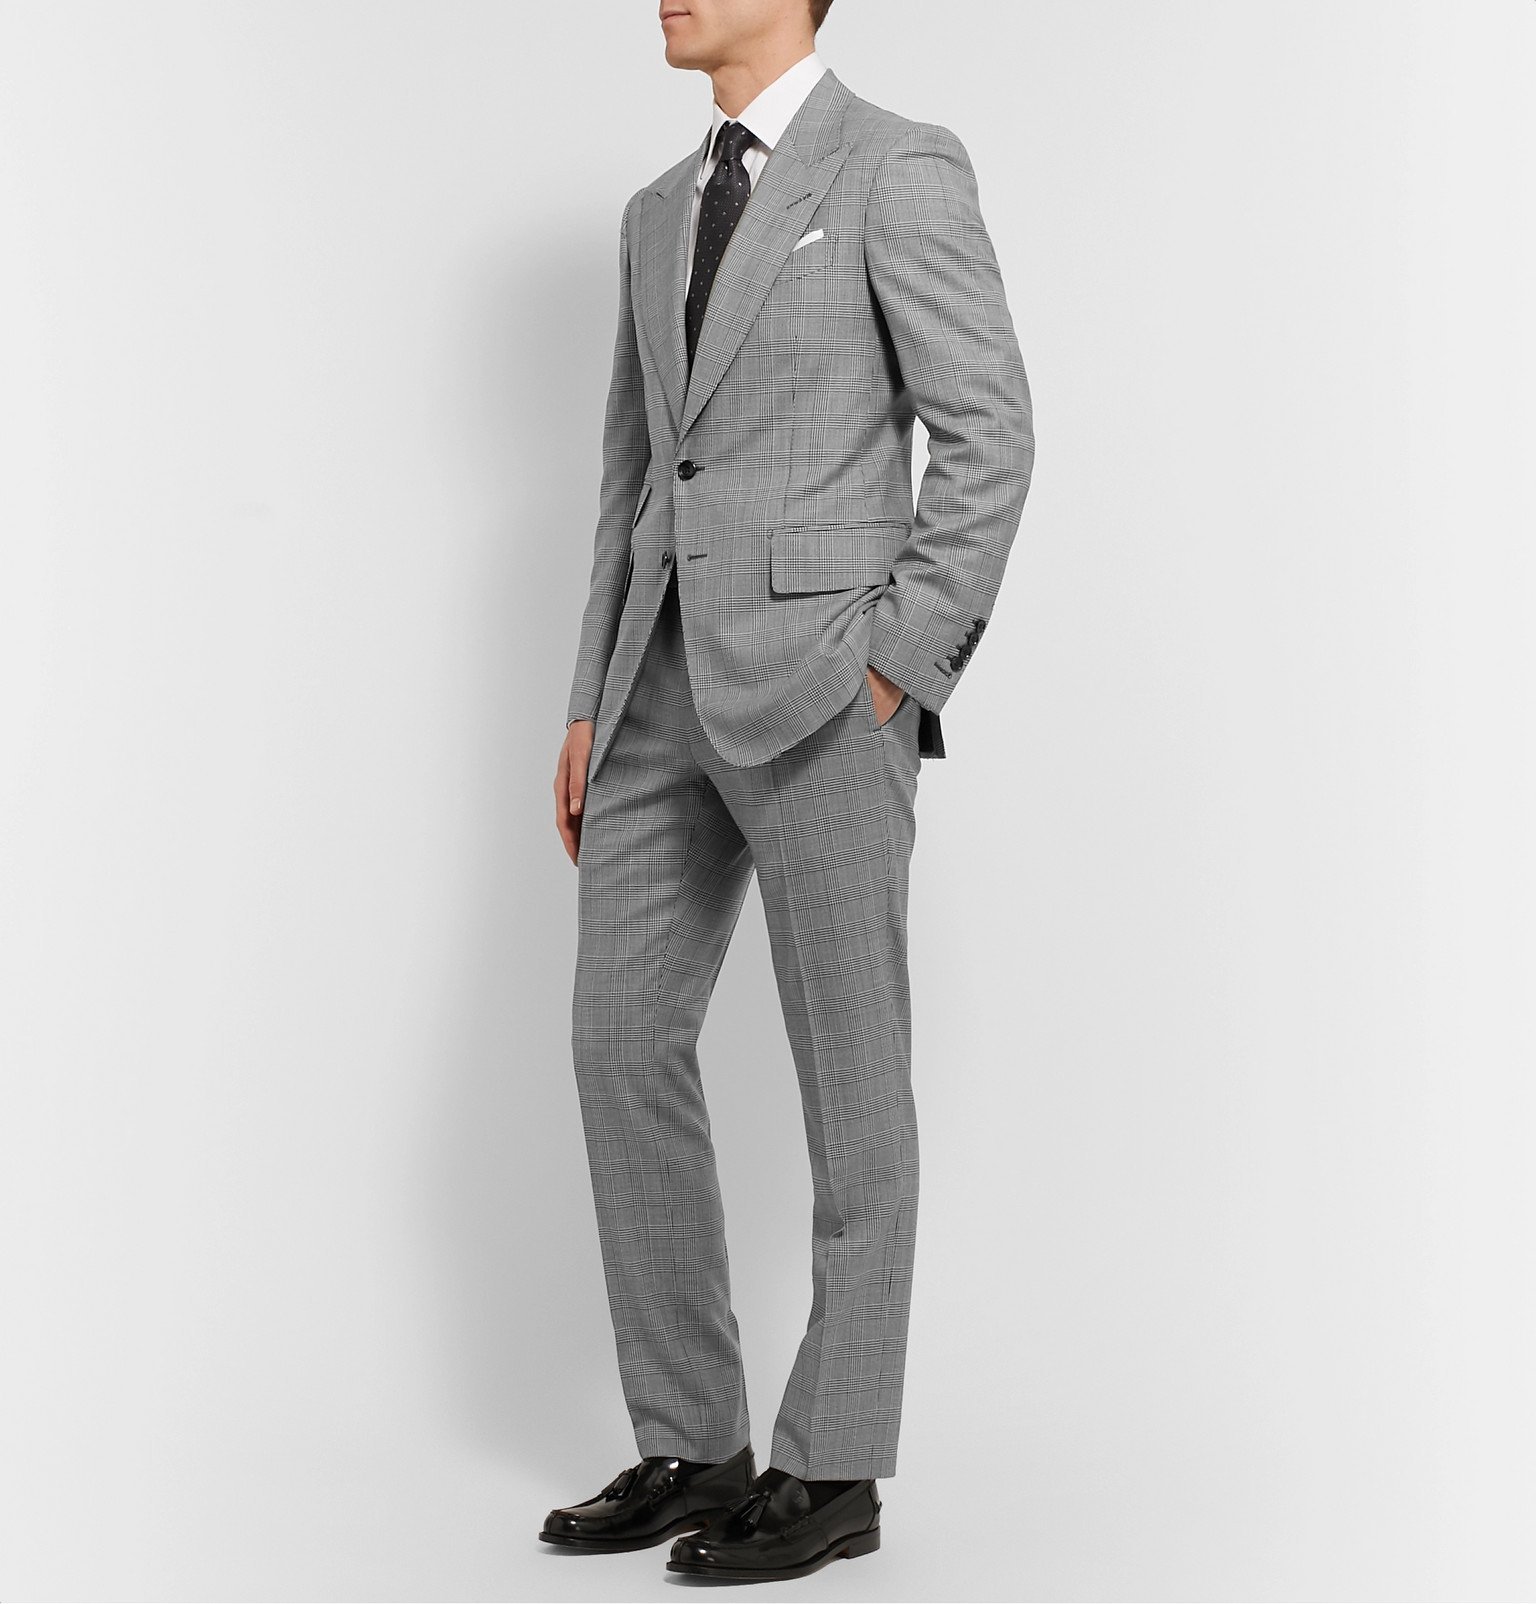 TOM FORD - Slim-Fit Prince of Wales Checked Wool Suit Trousers - Gray TOM  FORD